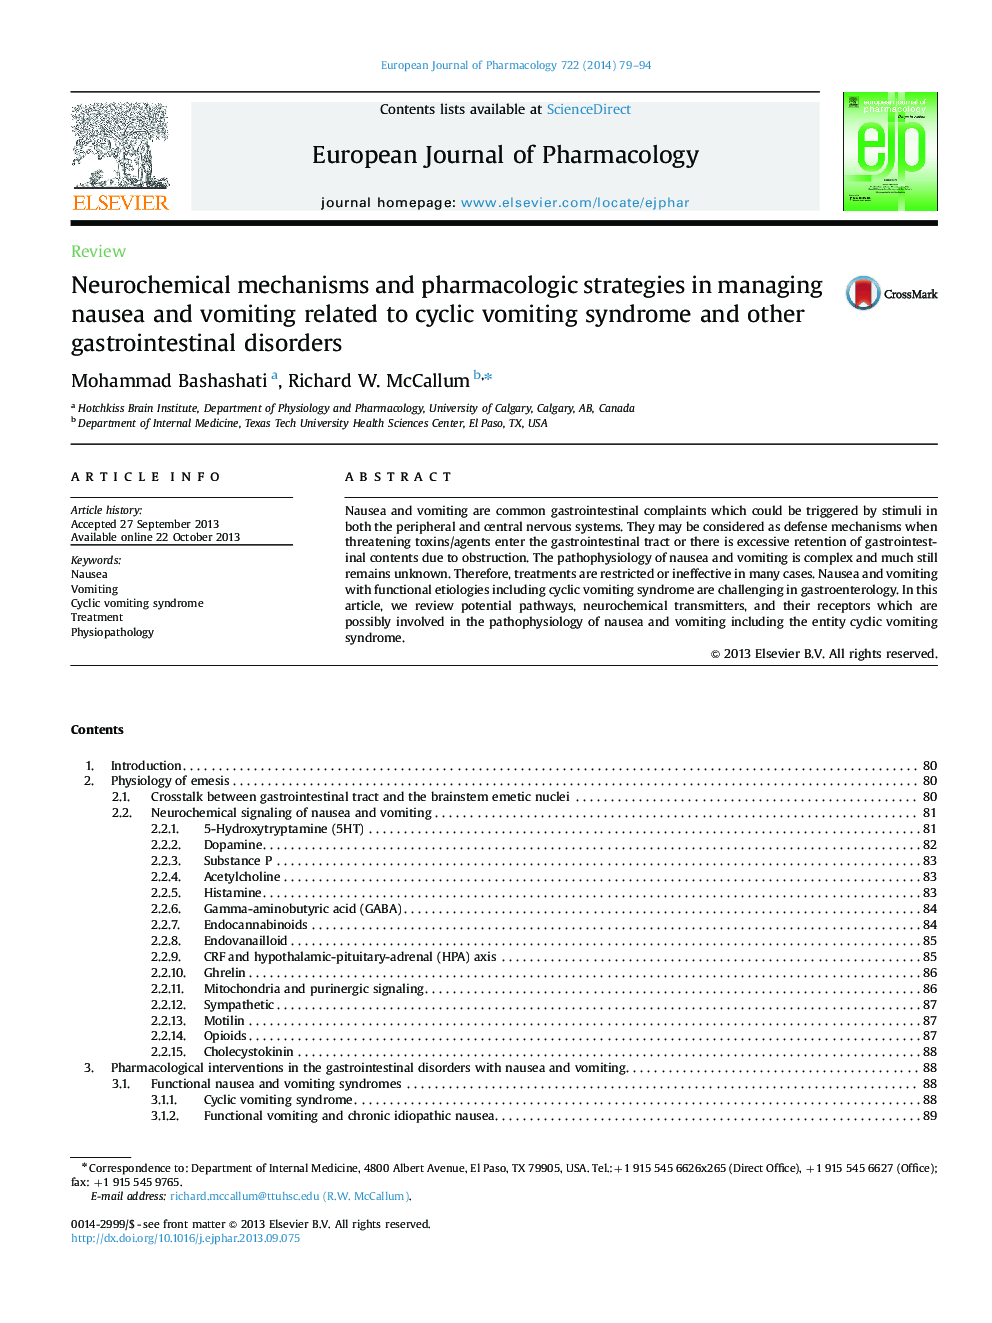 Neurochemical mechanisms and pharmacologic strategies in managing nausea and vomiting related to cyclic vomiting syndrome and other gastrointestinal disorders